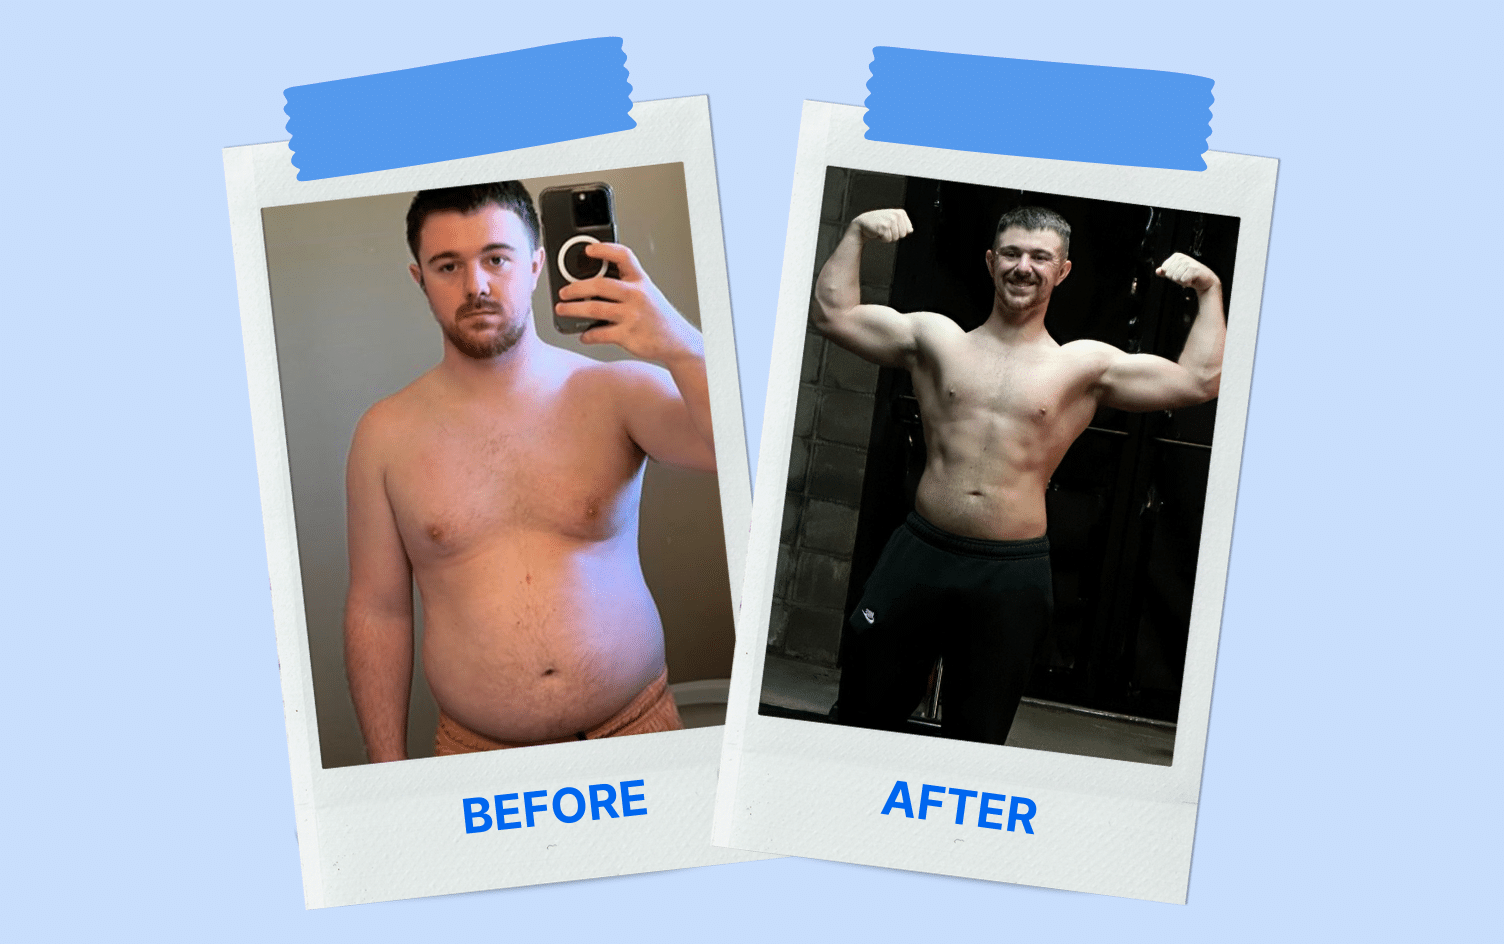 How Dillion Lost 40 Pounds in 100 Days